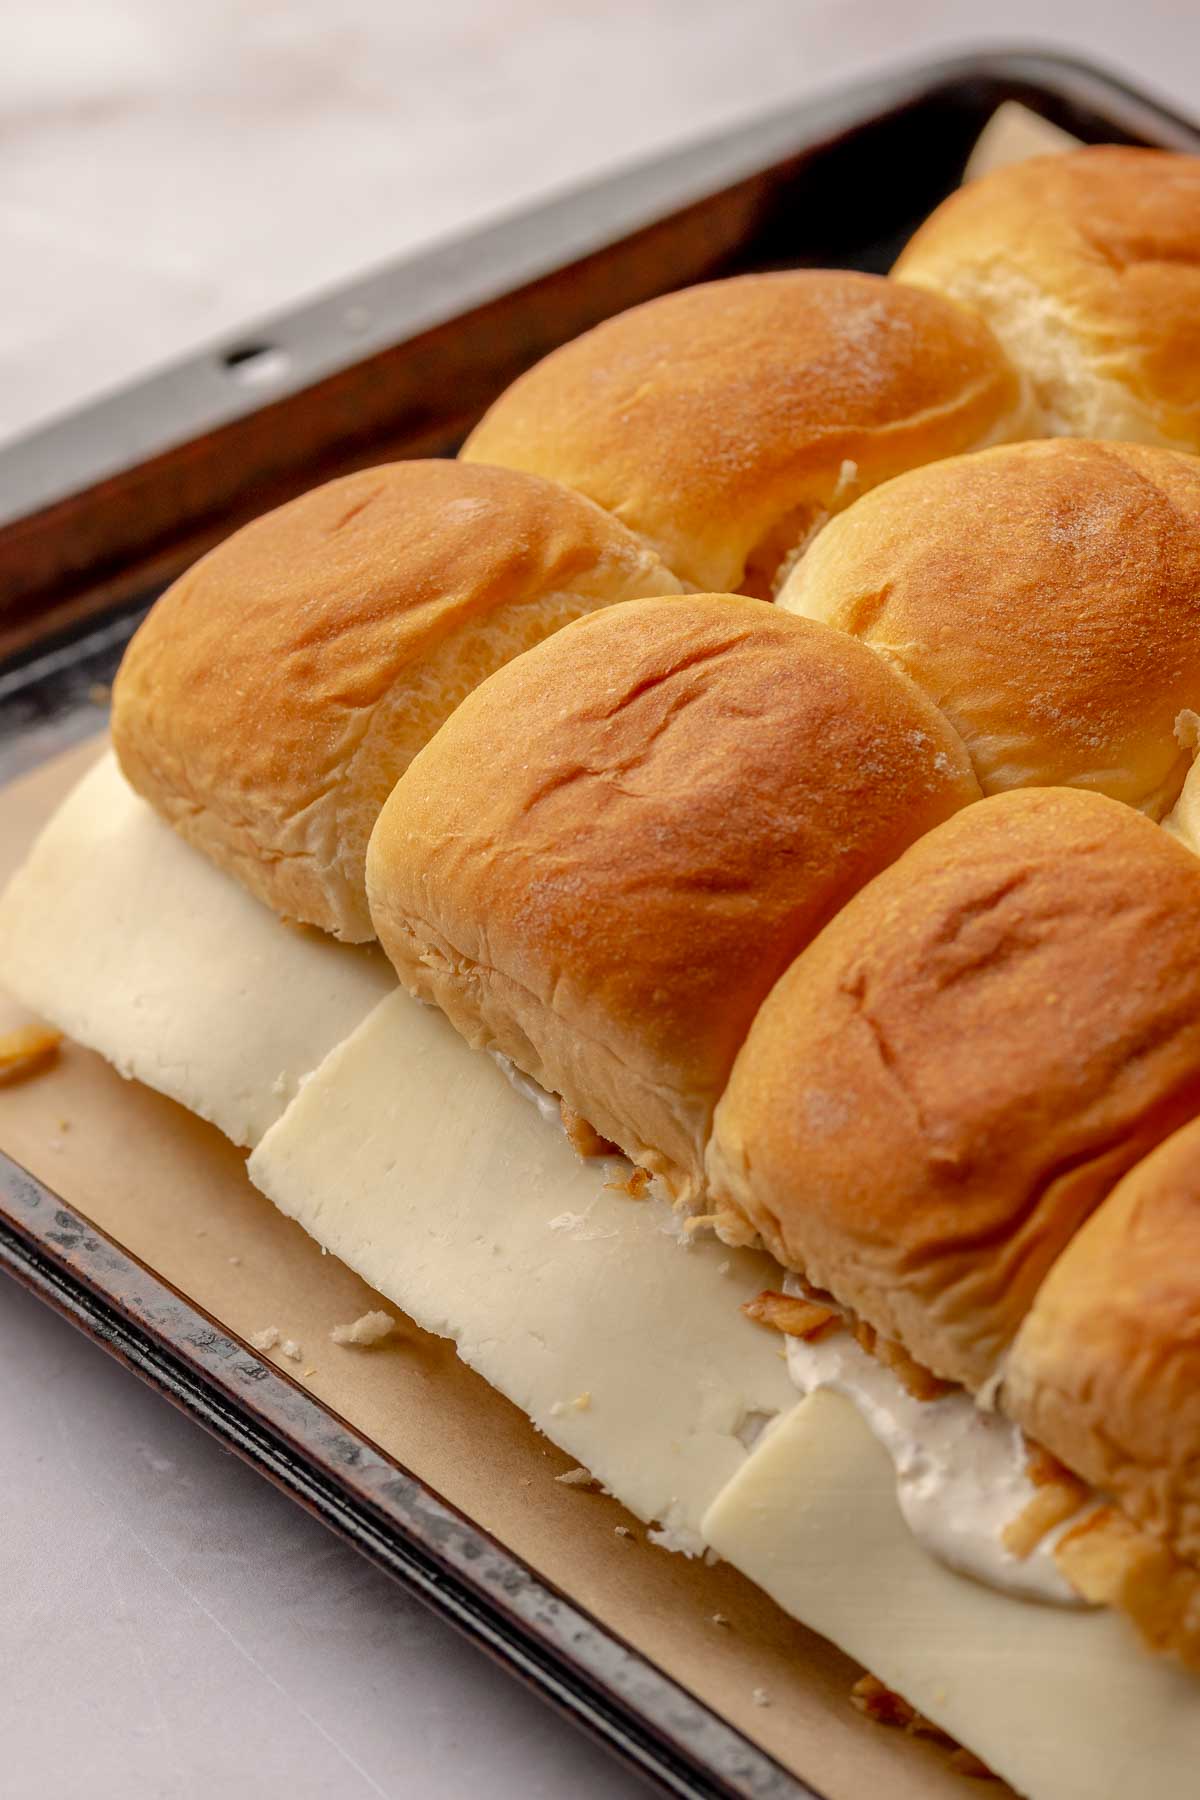 Sliders fully assembled on a pan. Cheese hangs over the sides of the buns.